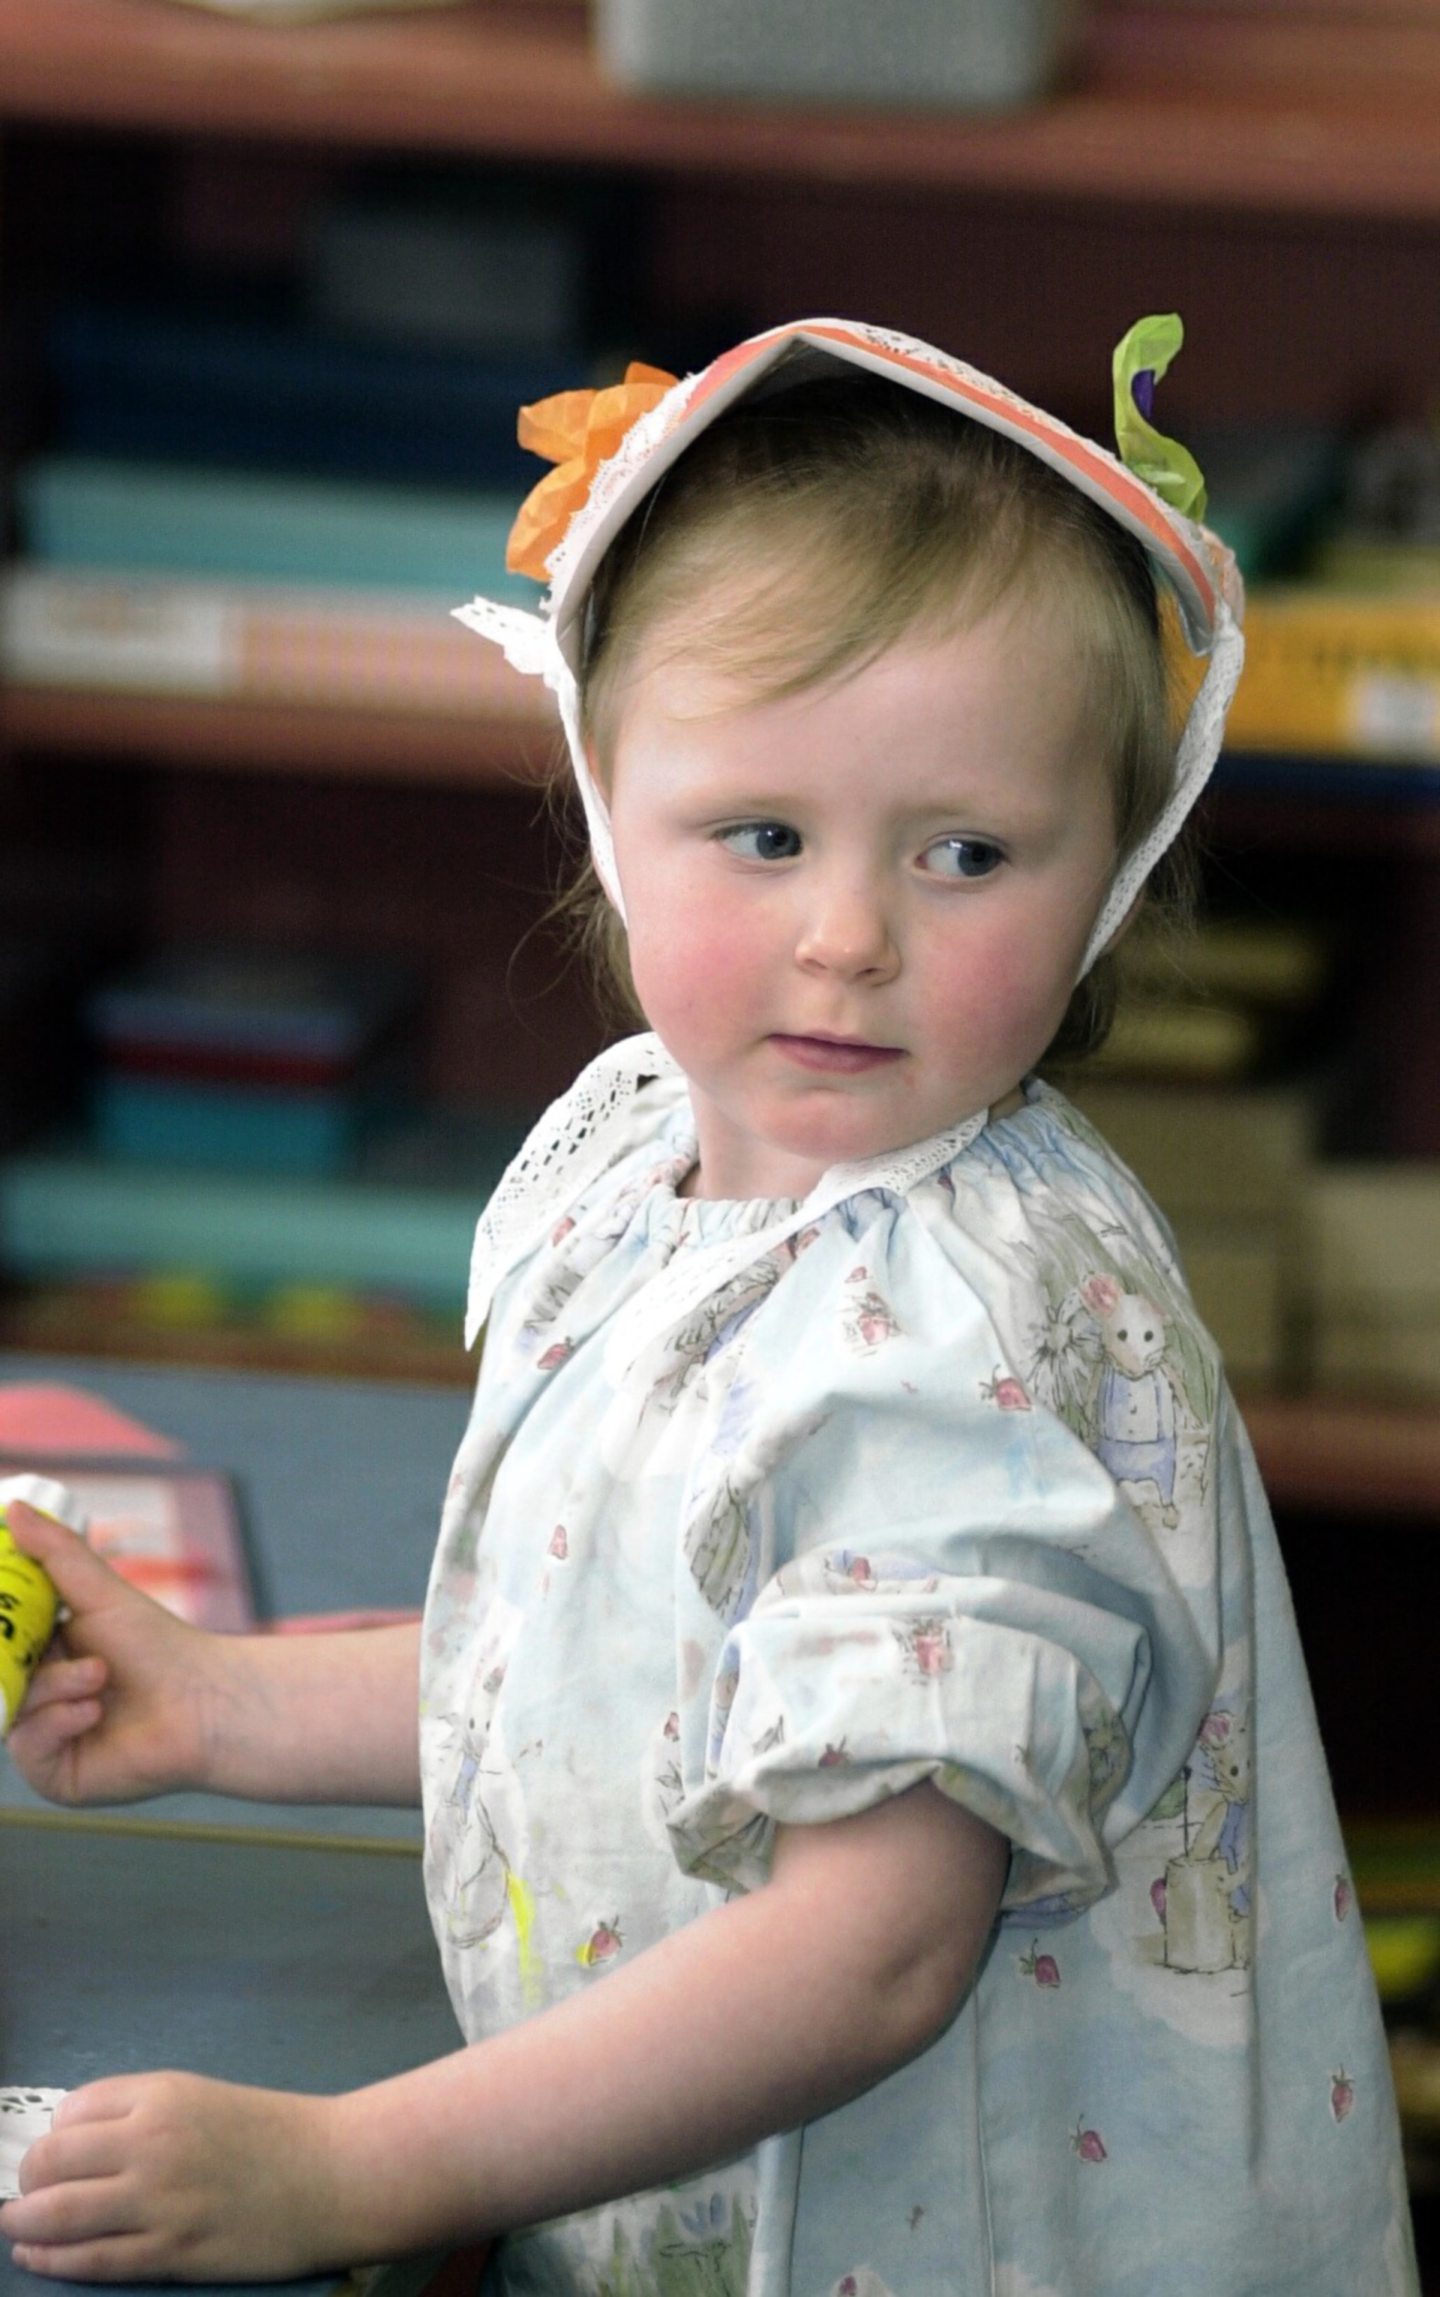 Nursery pupils at Bramble Brae School in Aberdeen were holding an Easter crafts session in 2003 and Lori Wilson shows off her creative headwear.